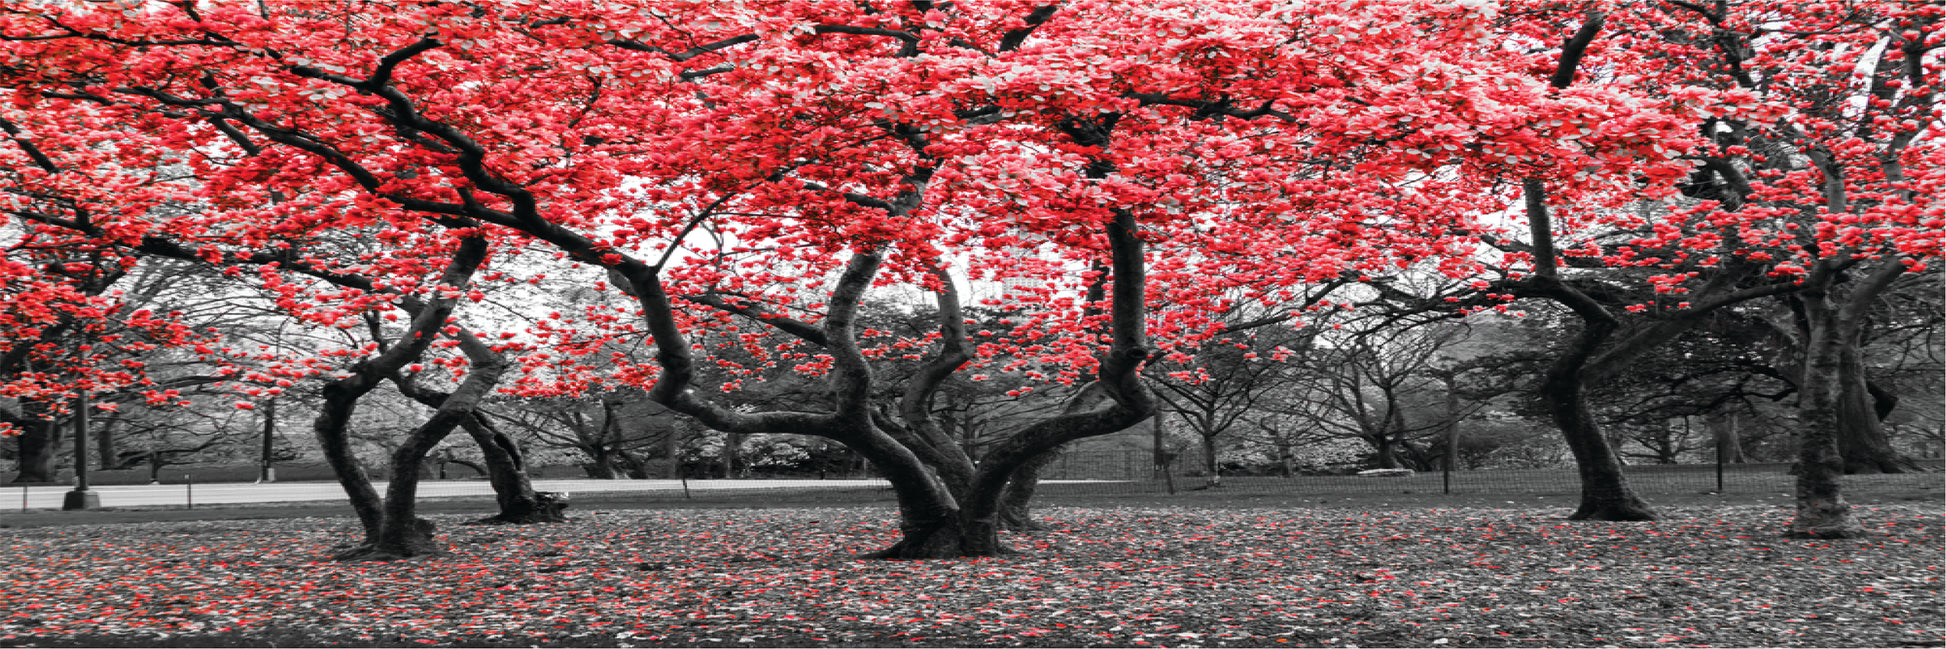 Panoramic Canvas Red Black Tree High Quality 100% Australian made wall Canvas Print ready to hang